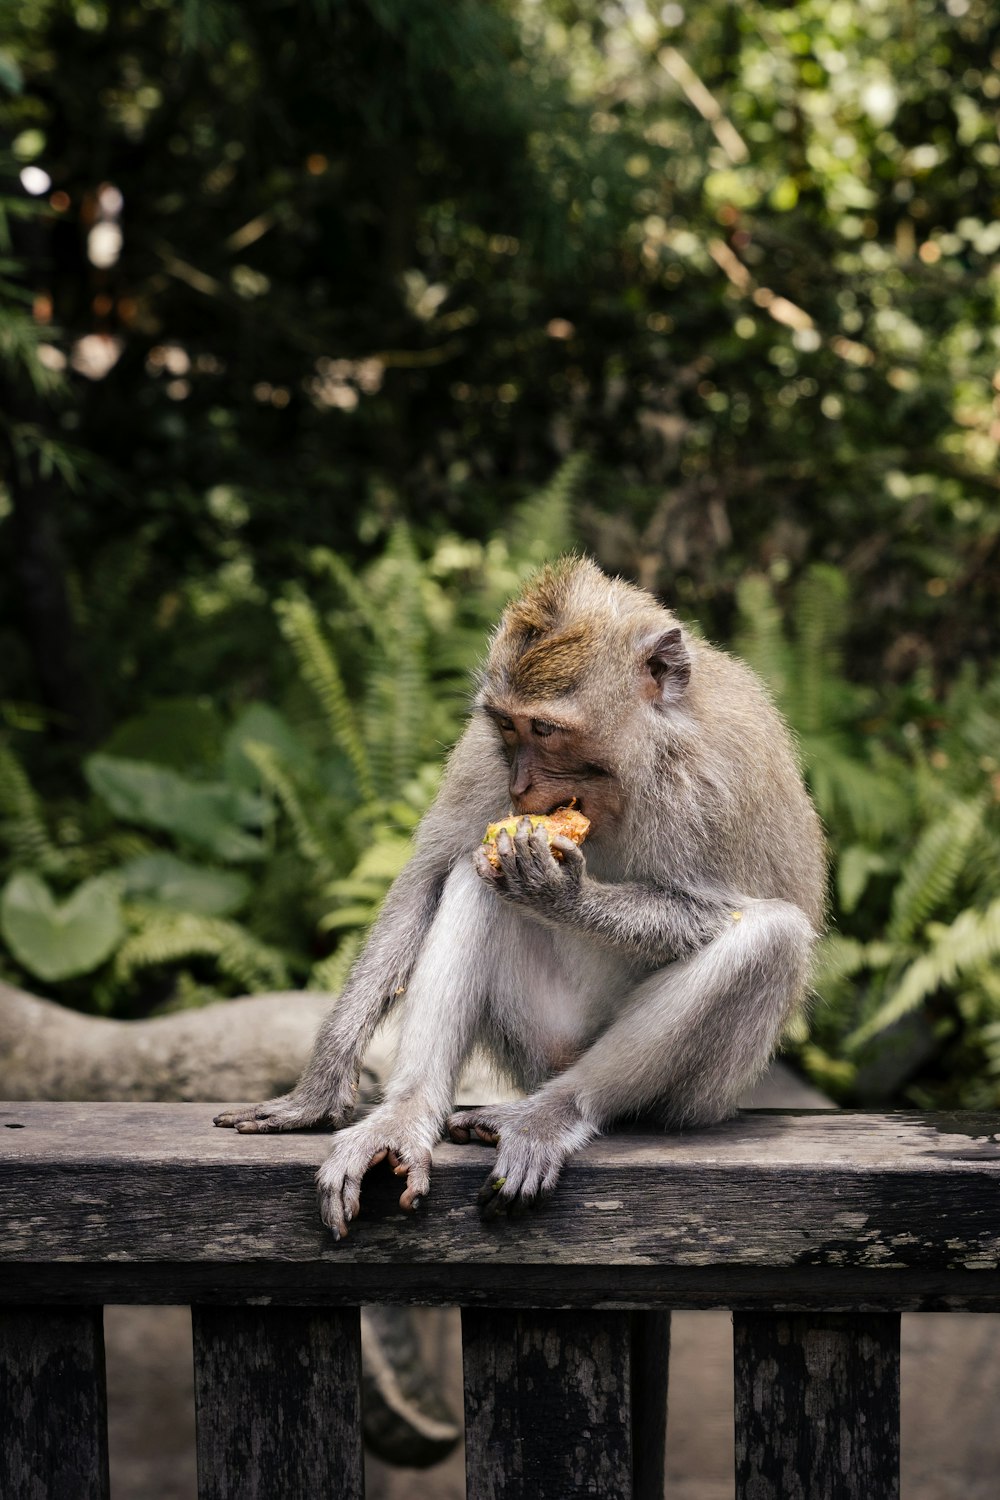 a monkey sitting on a wooden bench eating food